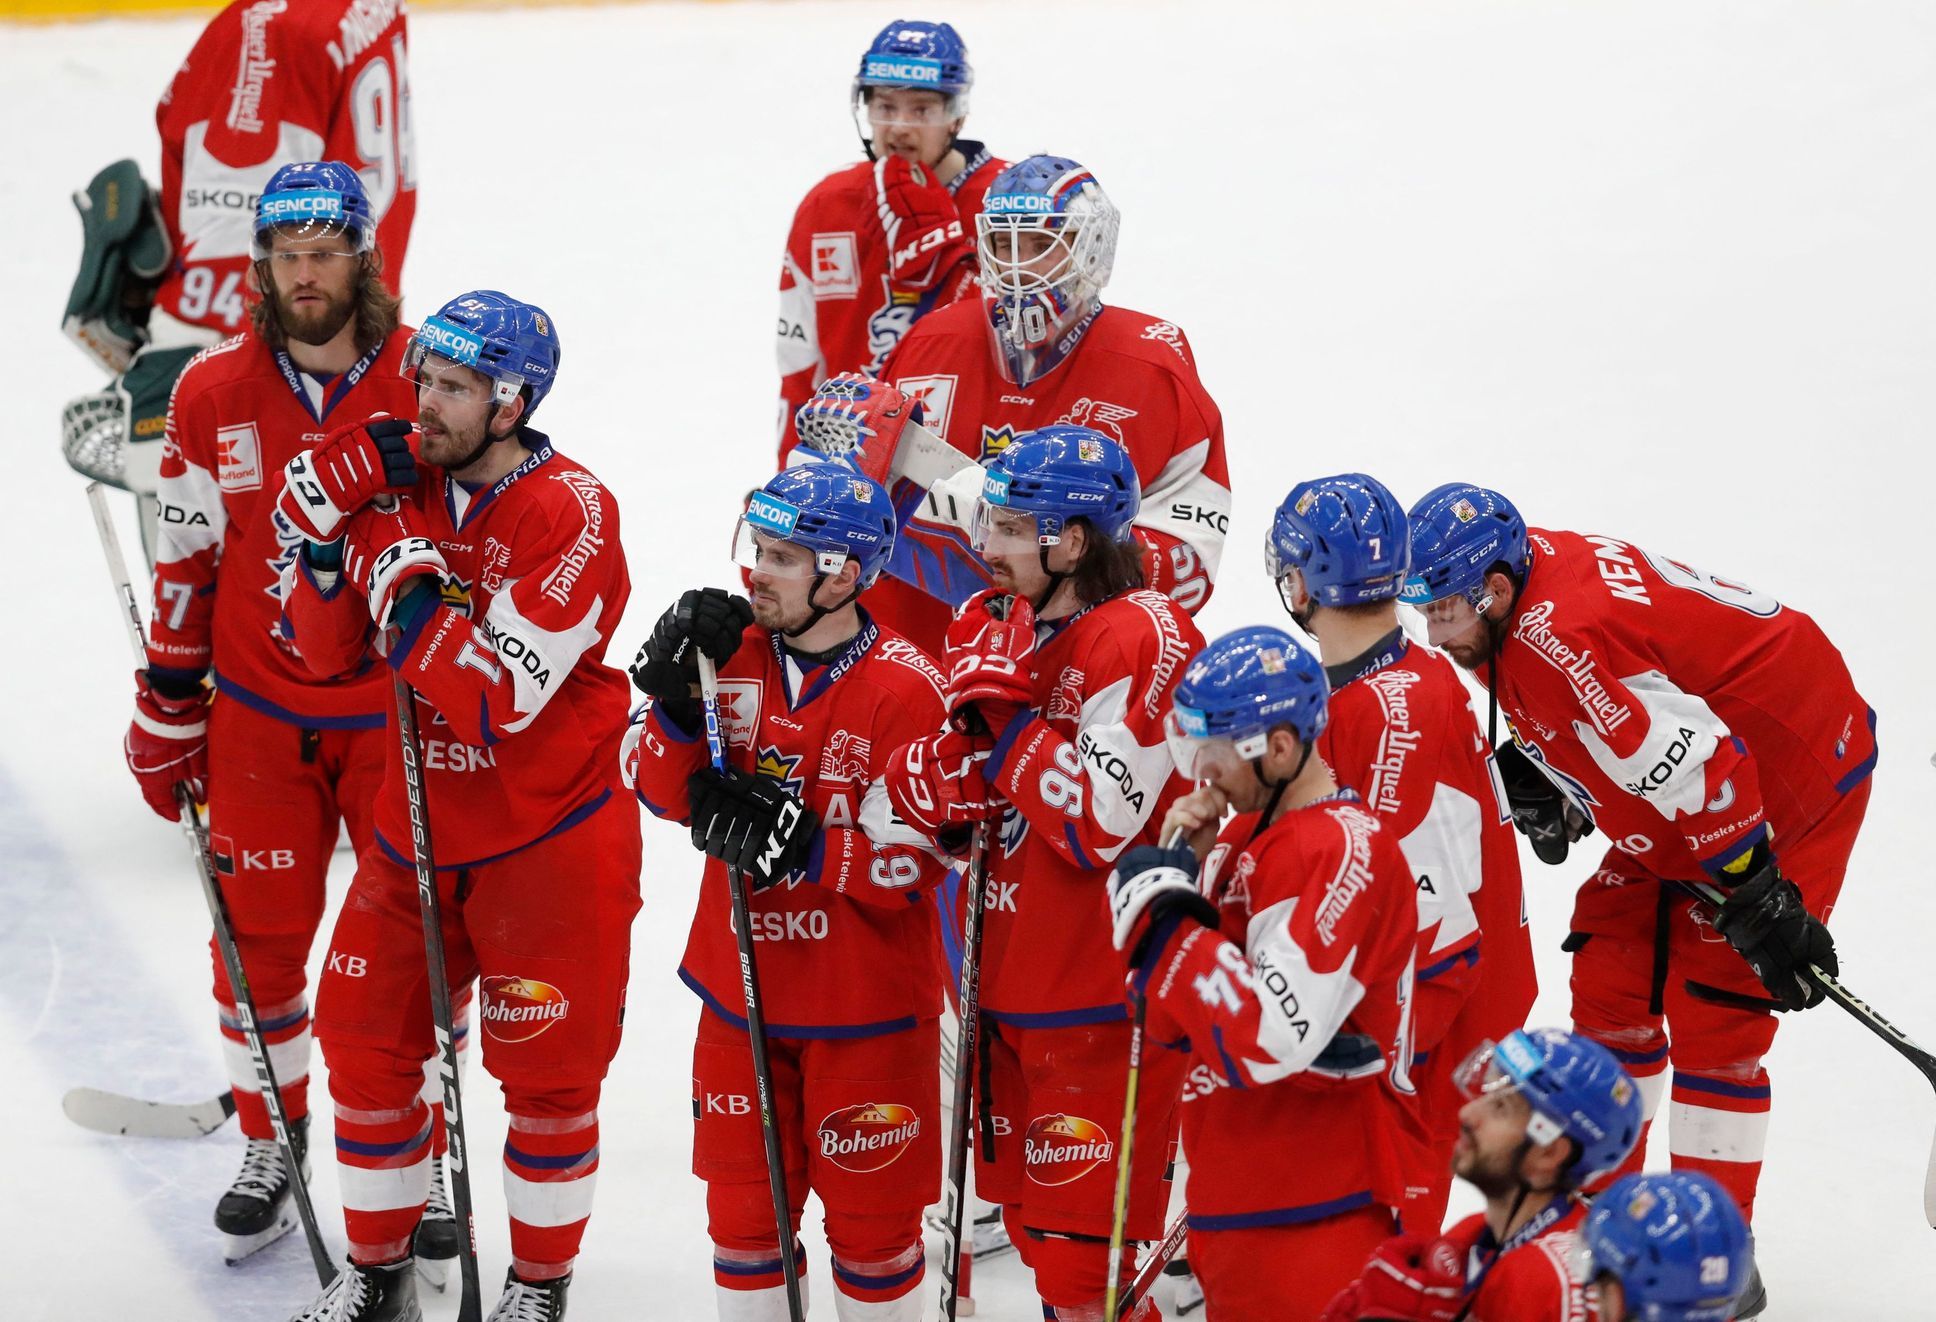 The hockey players did not play well in the warm-up for the world championship, they lost to Switzerland